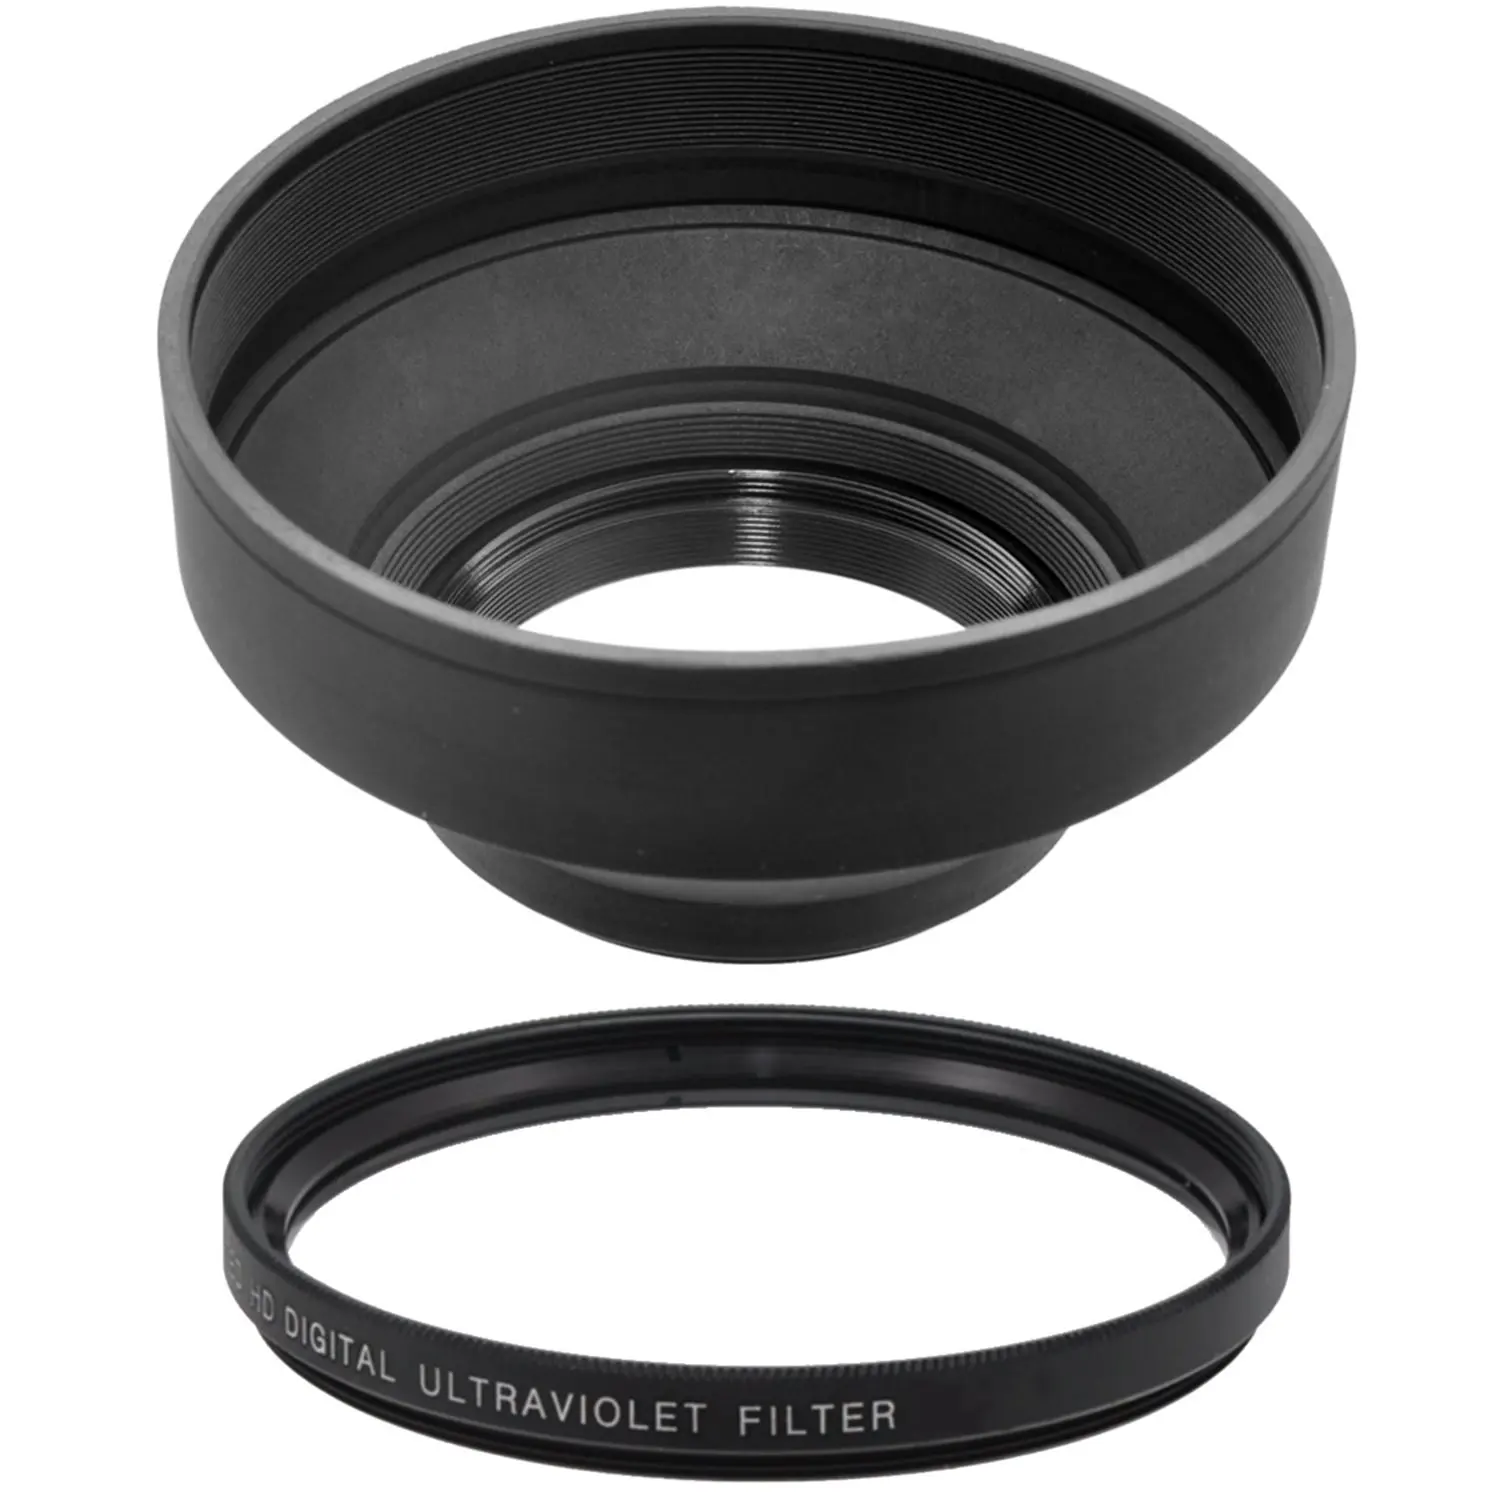 Market/&YCY Neutral Camera Lens Filter ND8 for Camera Lenses with 40.5mm Filter Threads